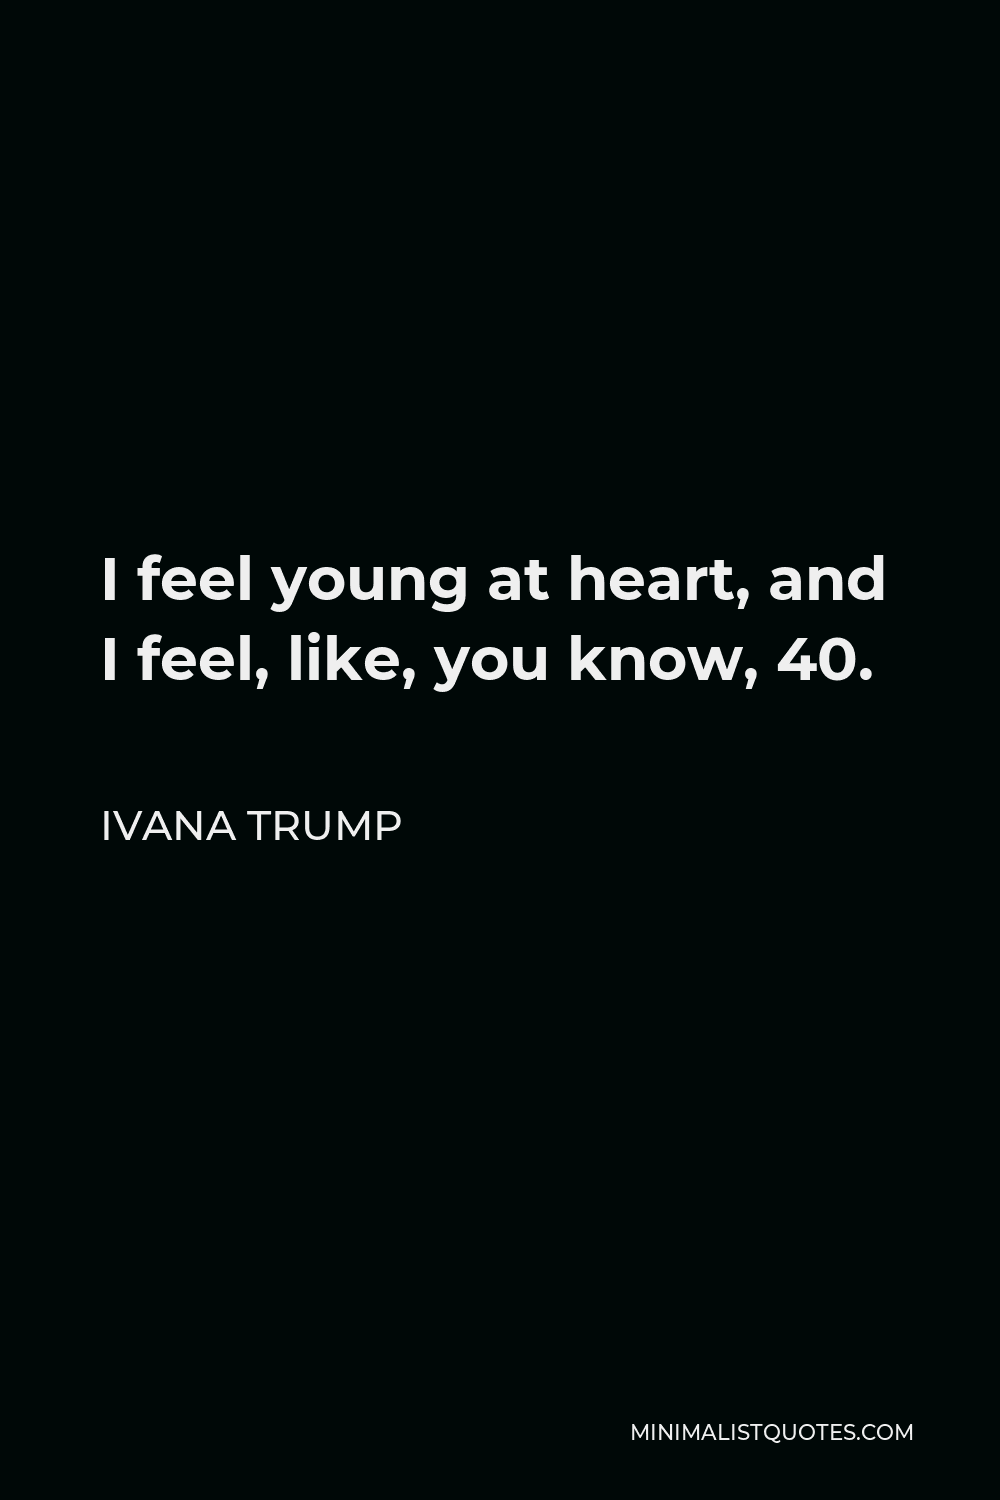 Ivana Trump Quote - I feel young at heart, and I feel, like, you know, 40.